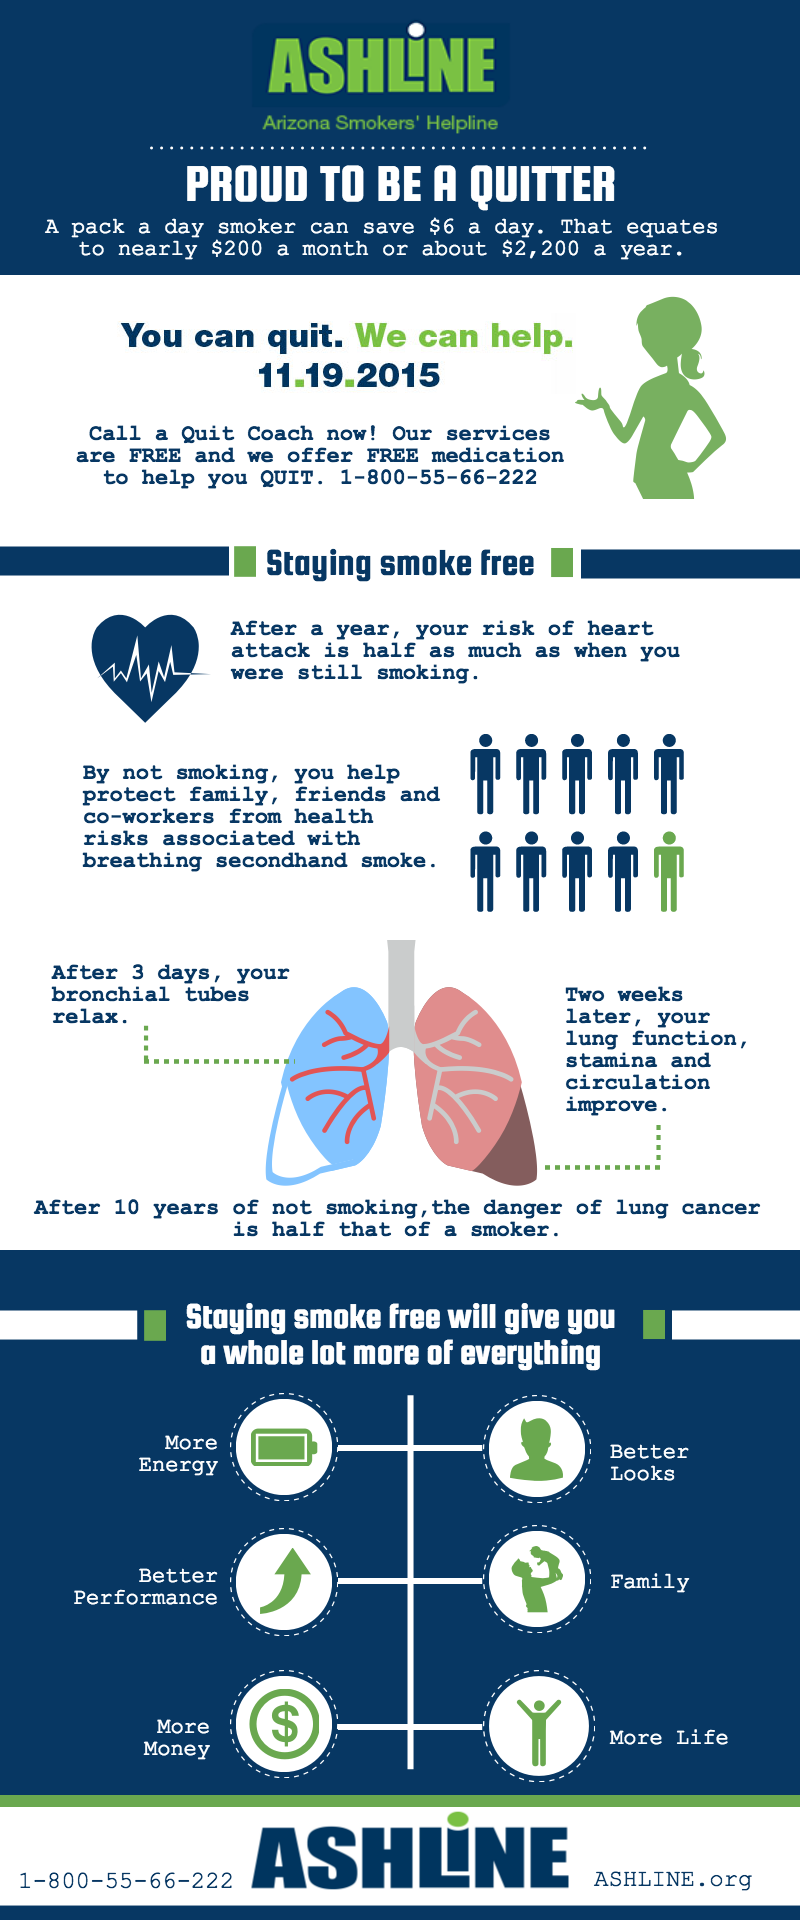 The health benefits of quitting smoking